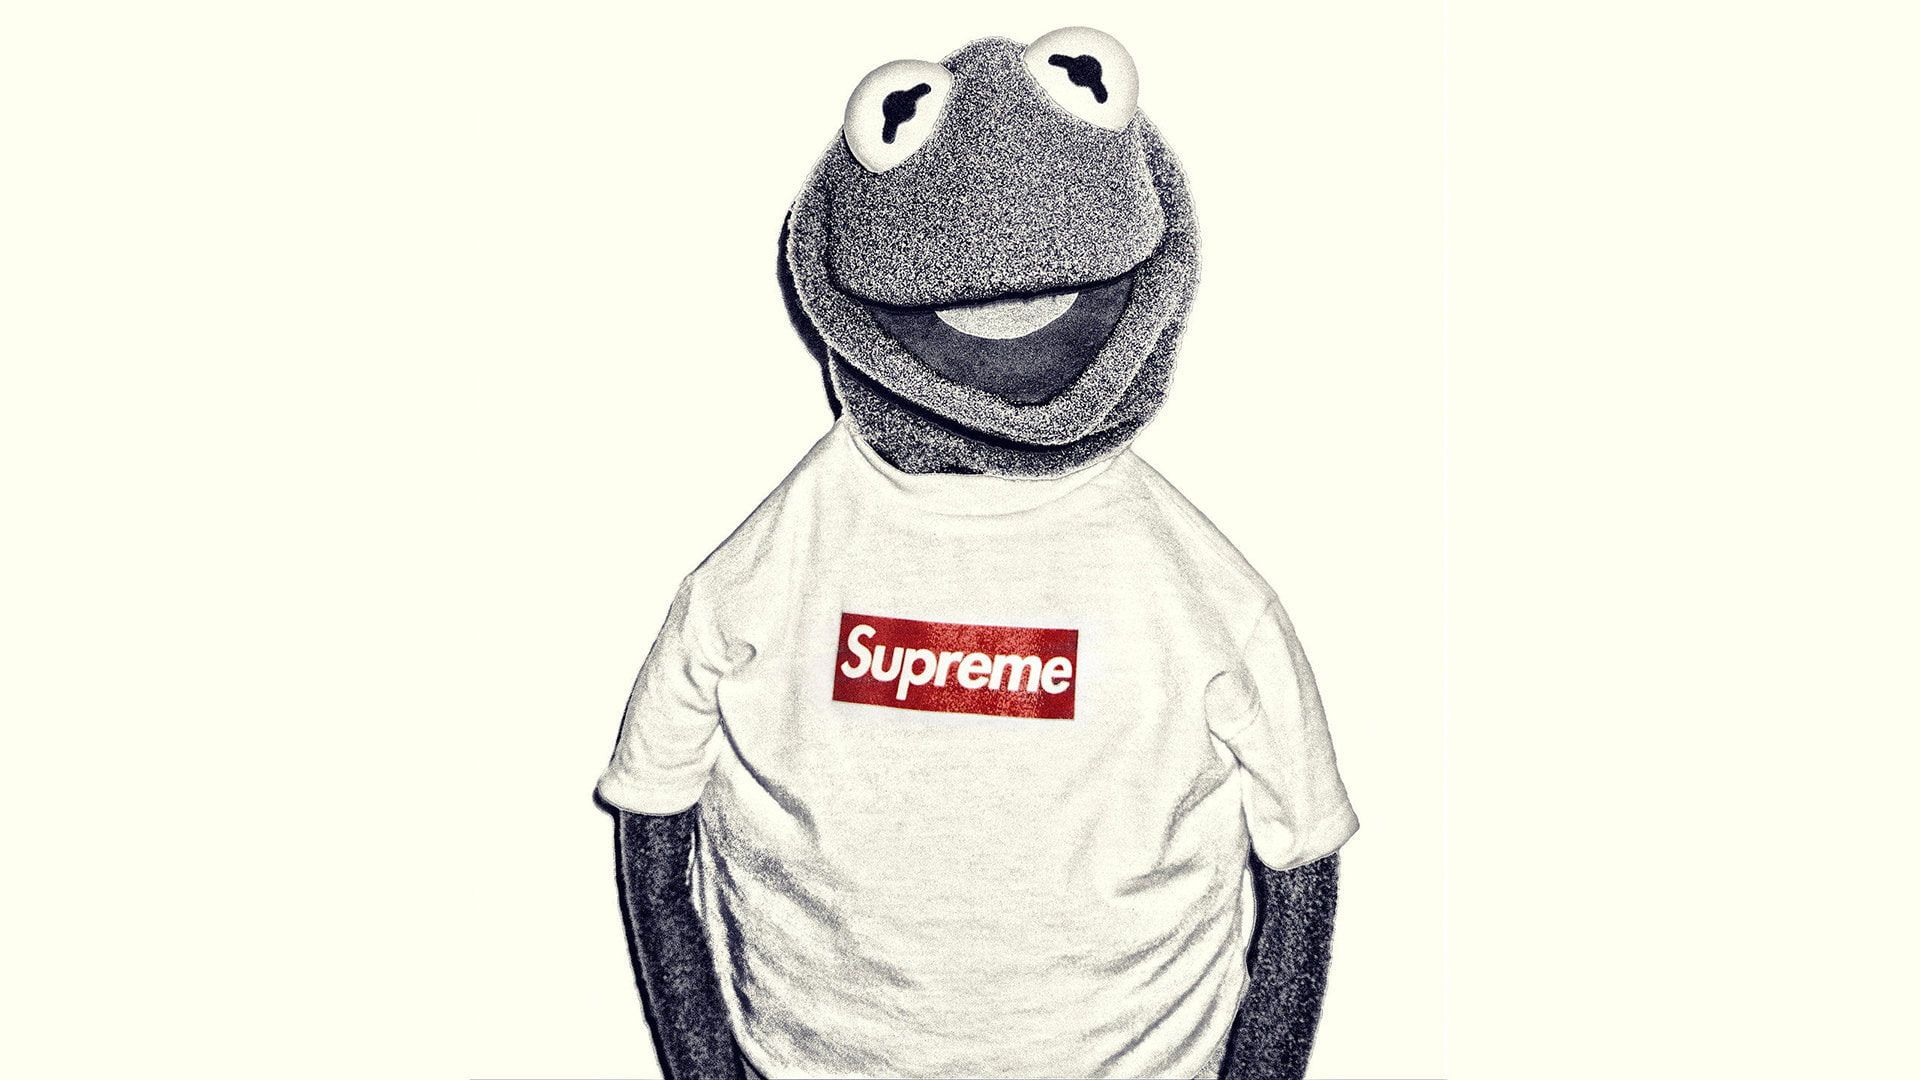 Kermit the Frog in a Supreme t-shirt. - Supreme